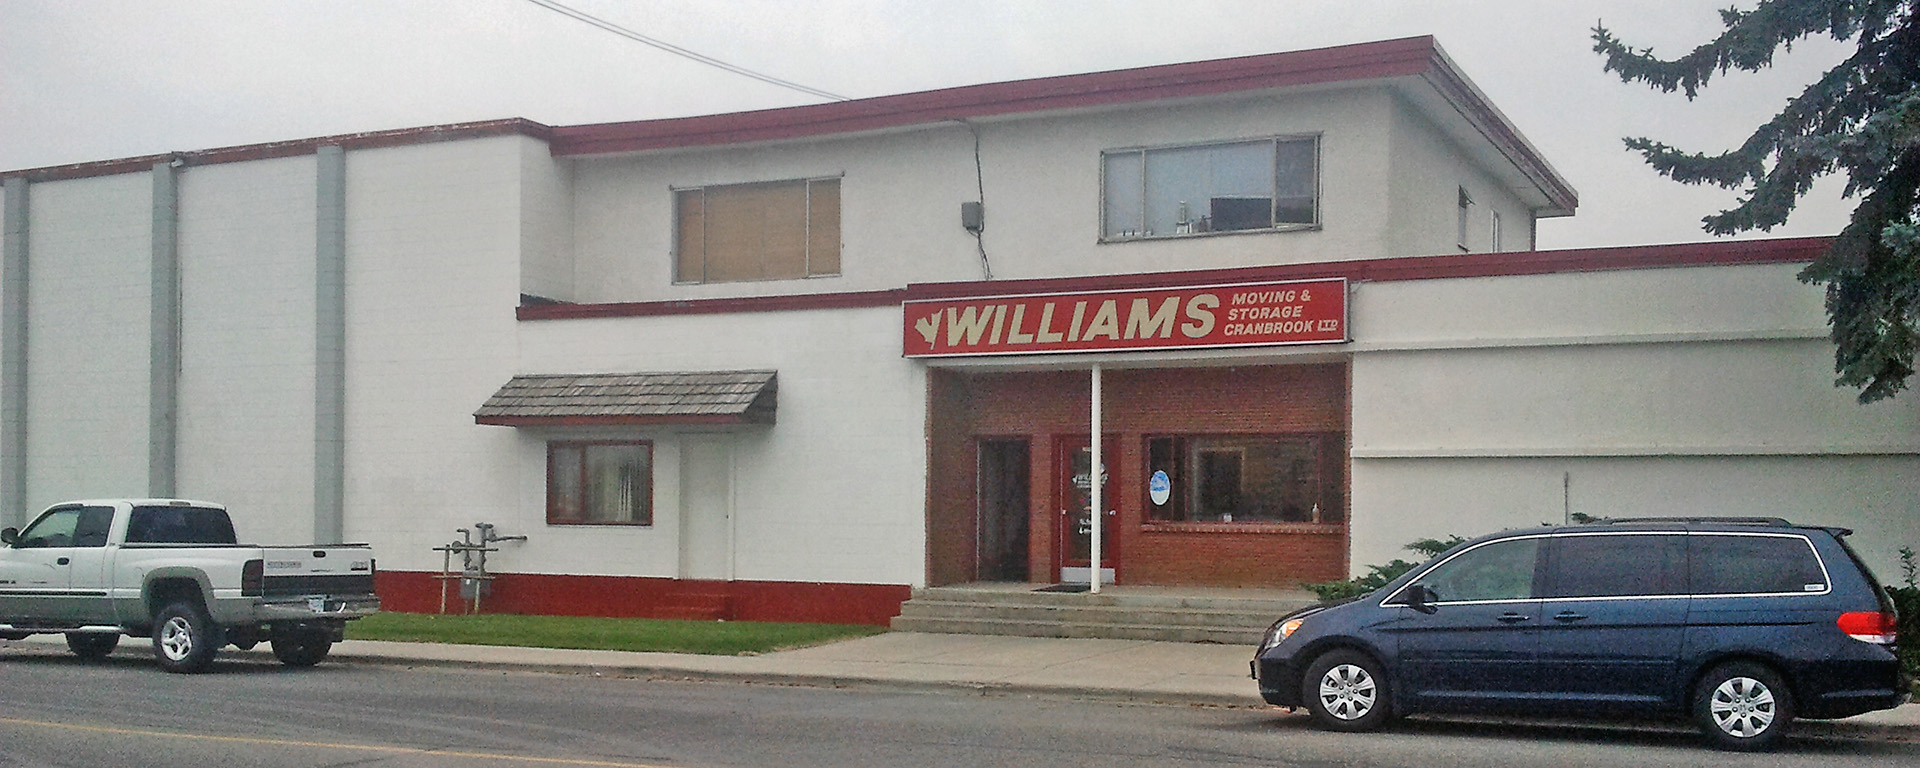 Exterior of the building of Williams Moving & Storage in Cranbrook 